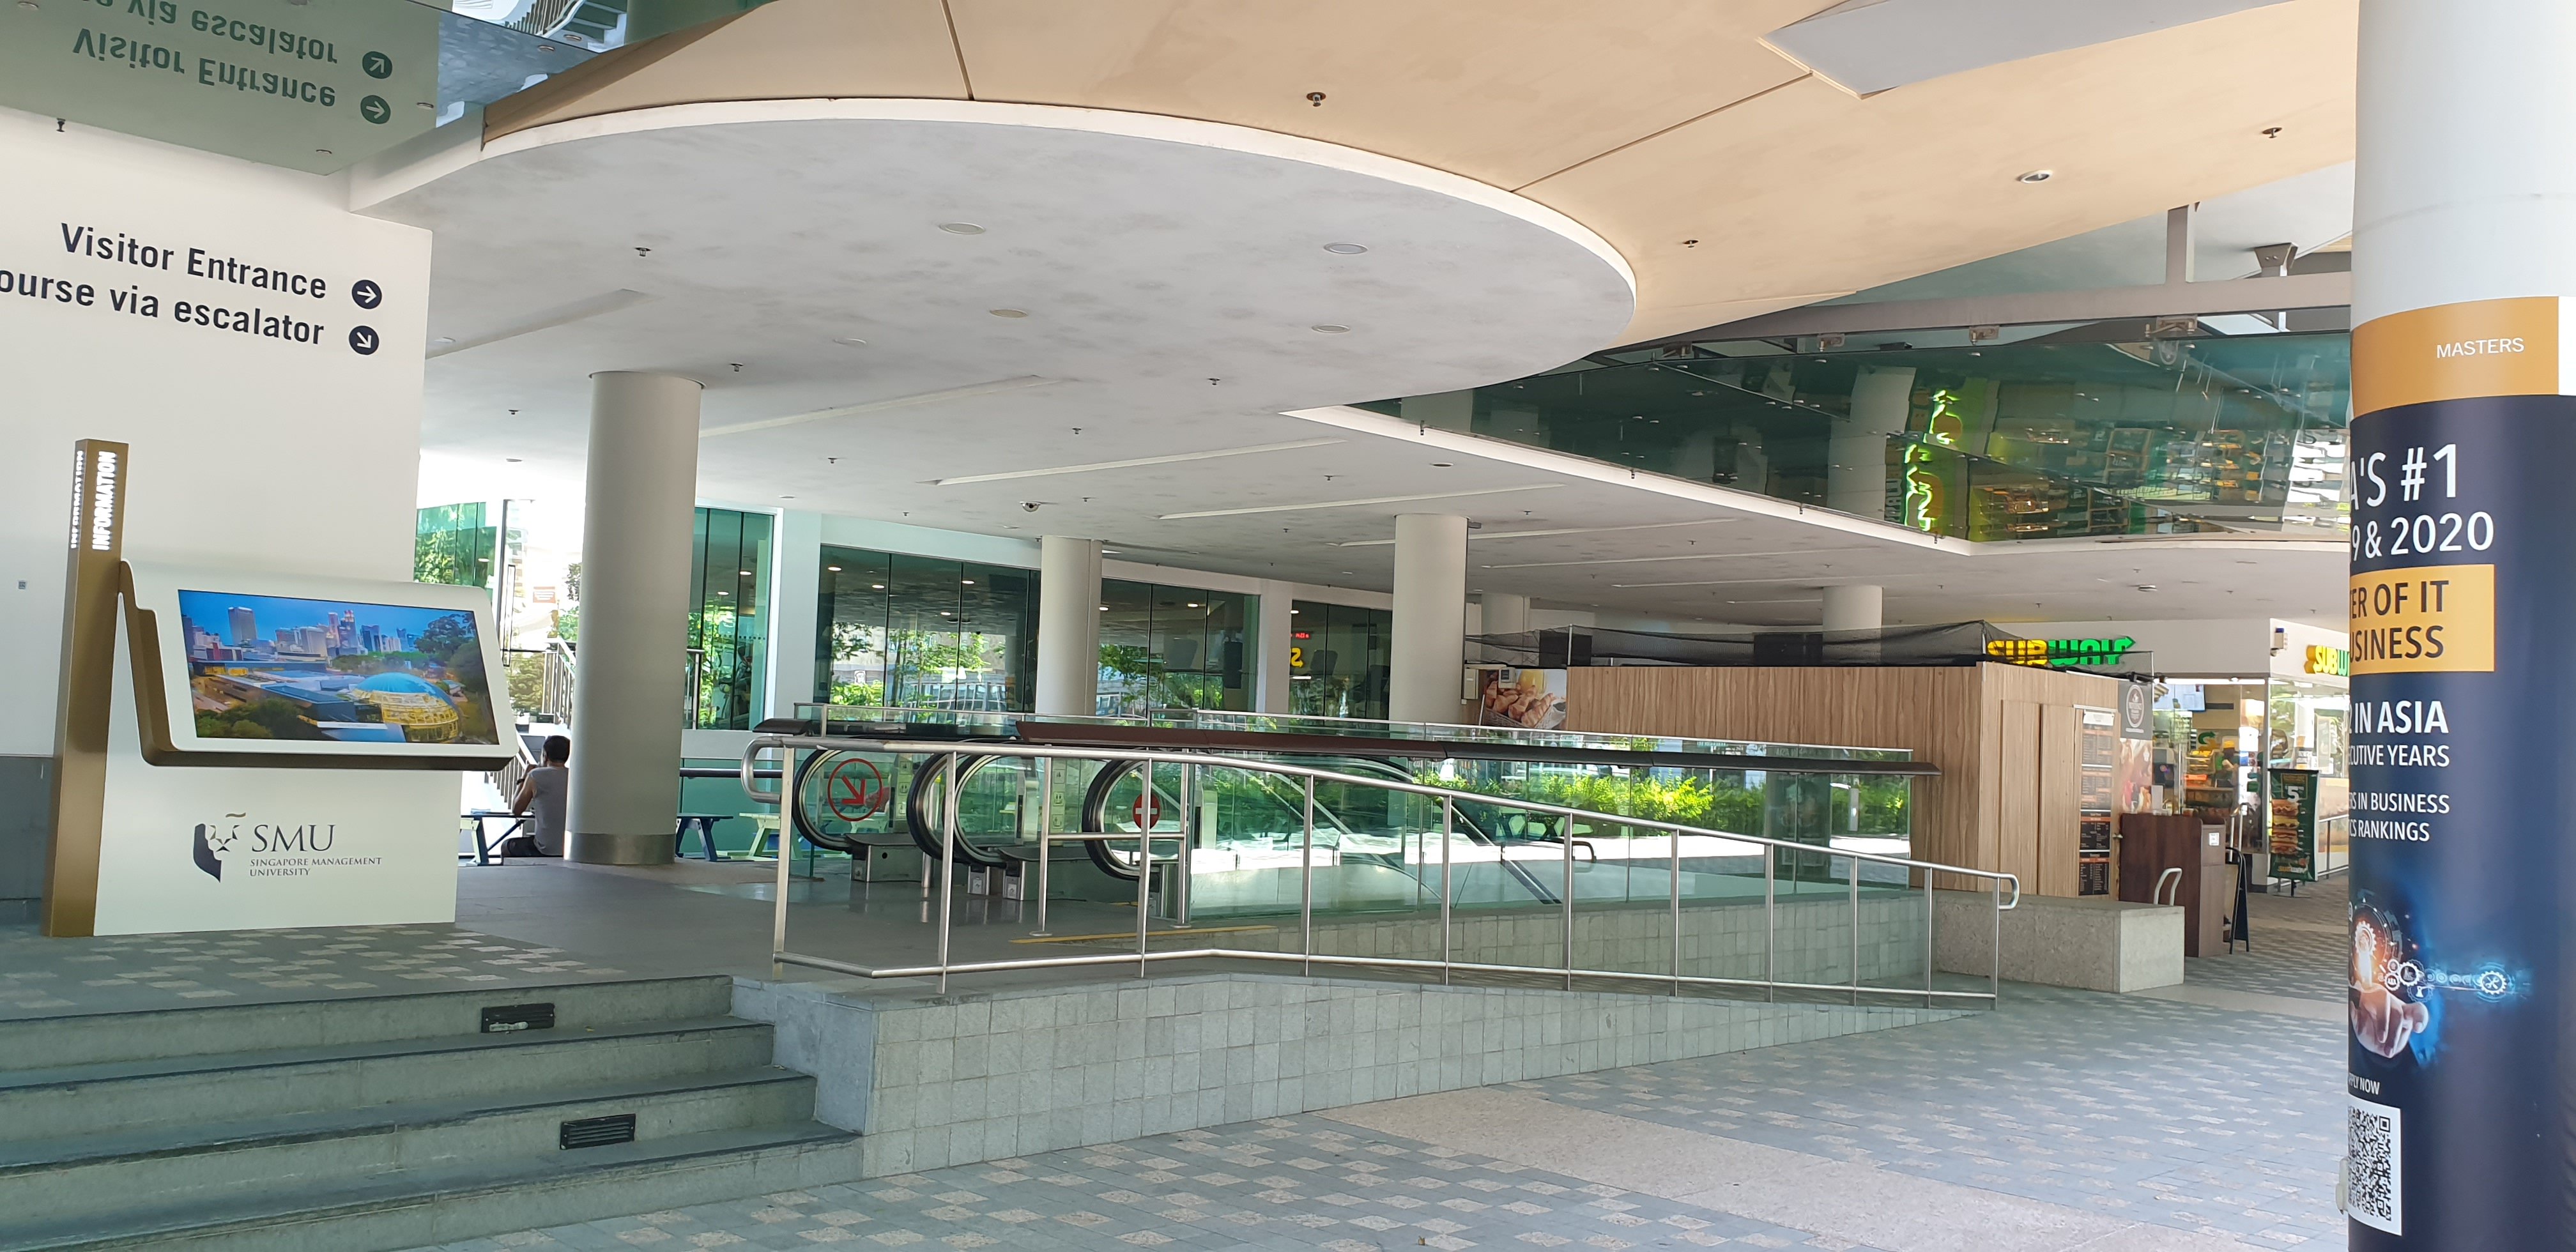 Located at SCIS ground level, next to the escalator opposite Subway.